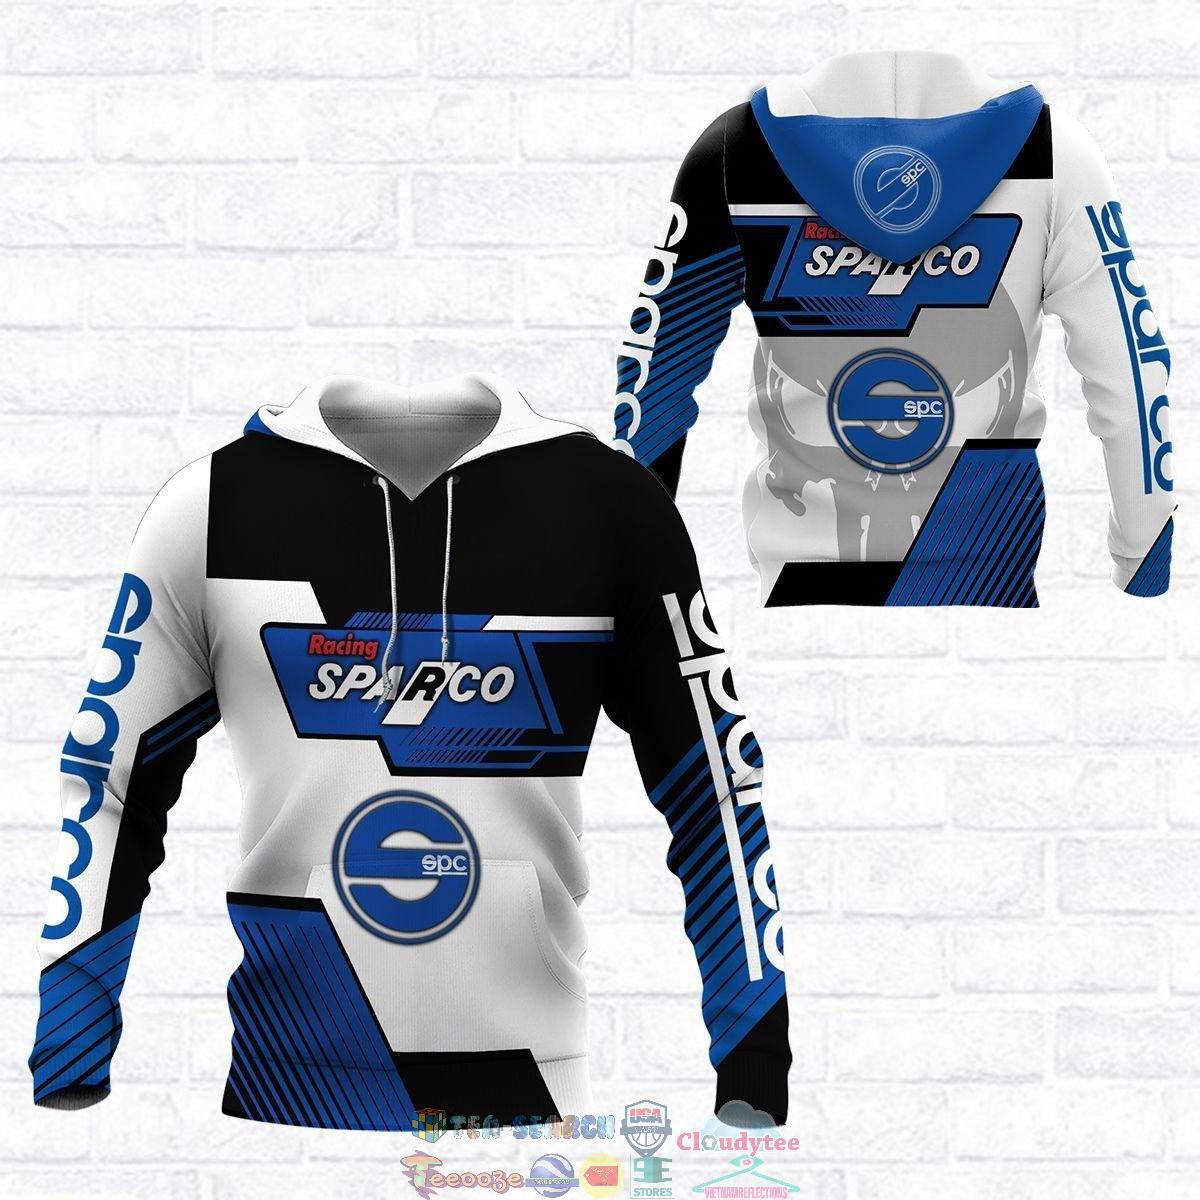 Sparco ver 10 3D hoodie and t-shirt